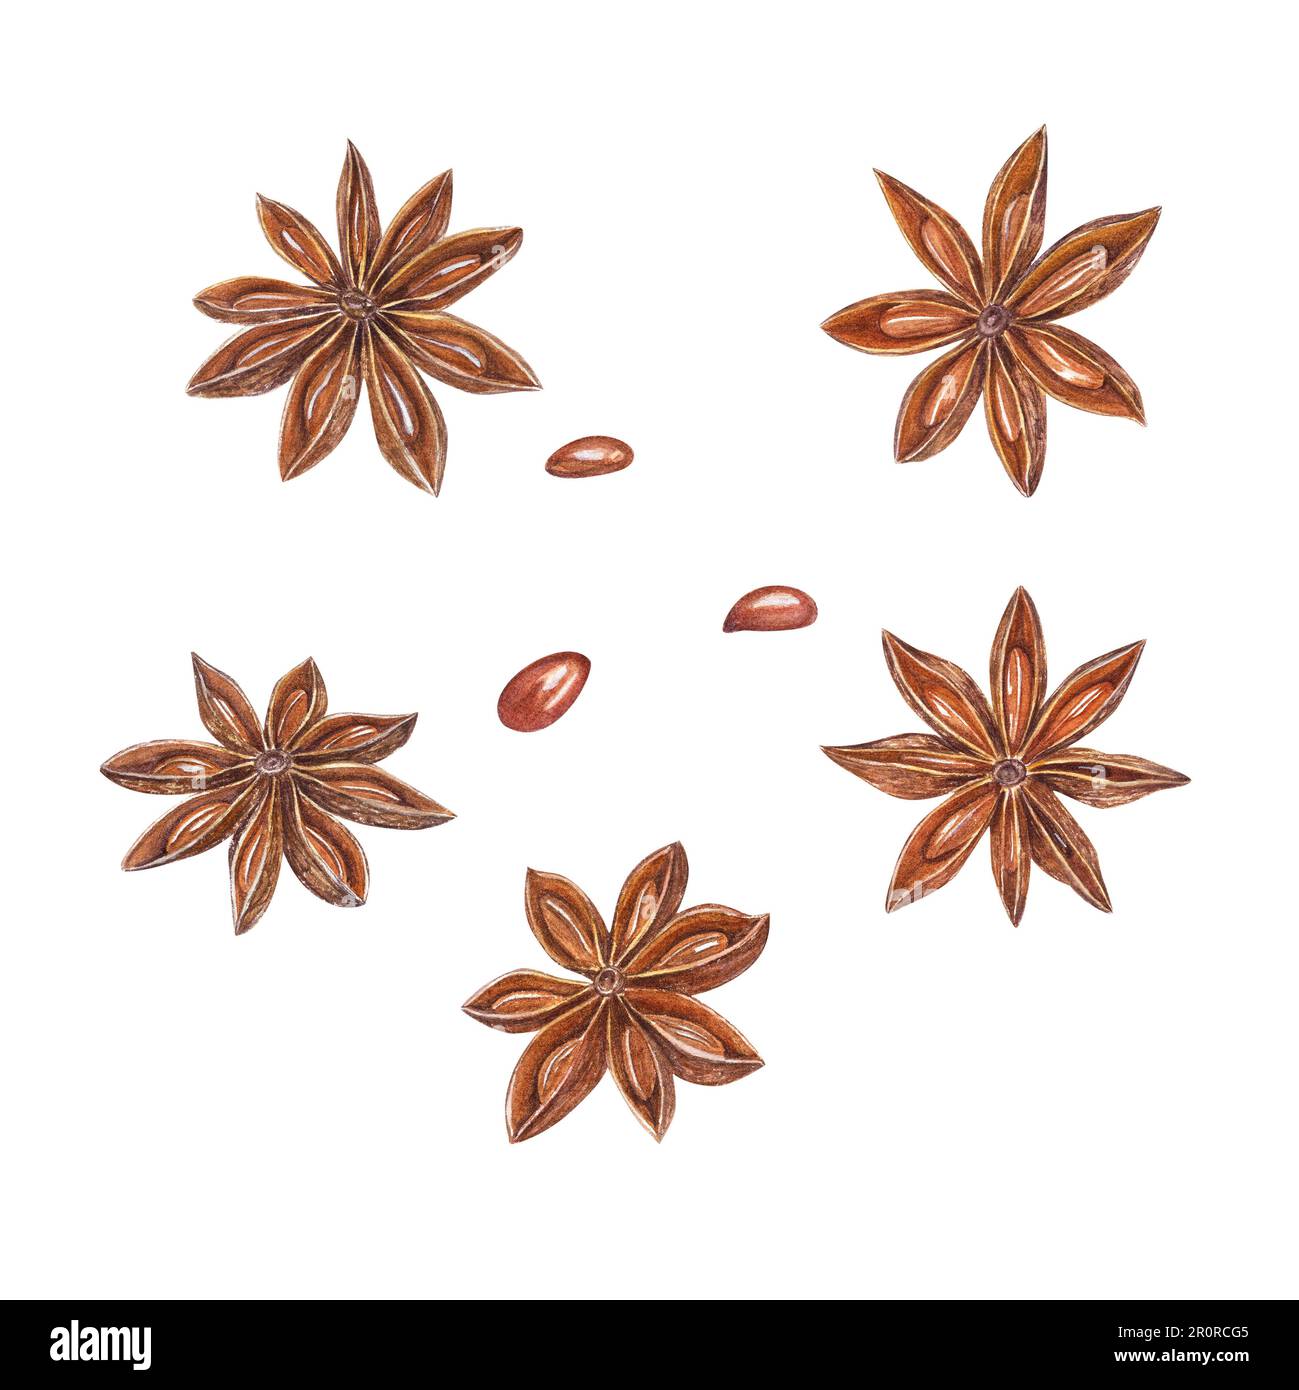 Watercolor set of star anise isolated on white background. Botanical illustration for Christmas and New Year cards, book design, greetings, stickers Stock Photo